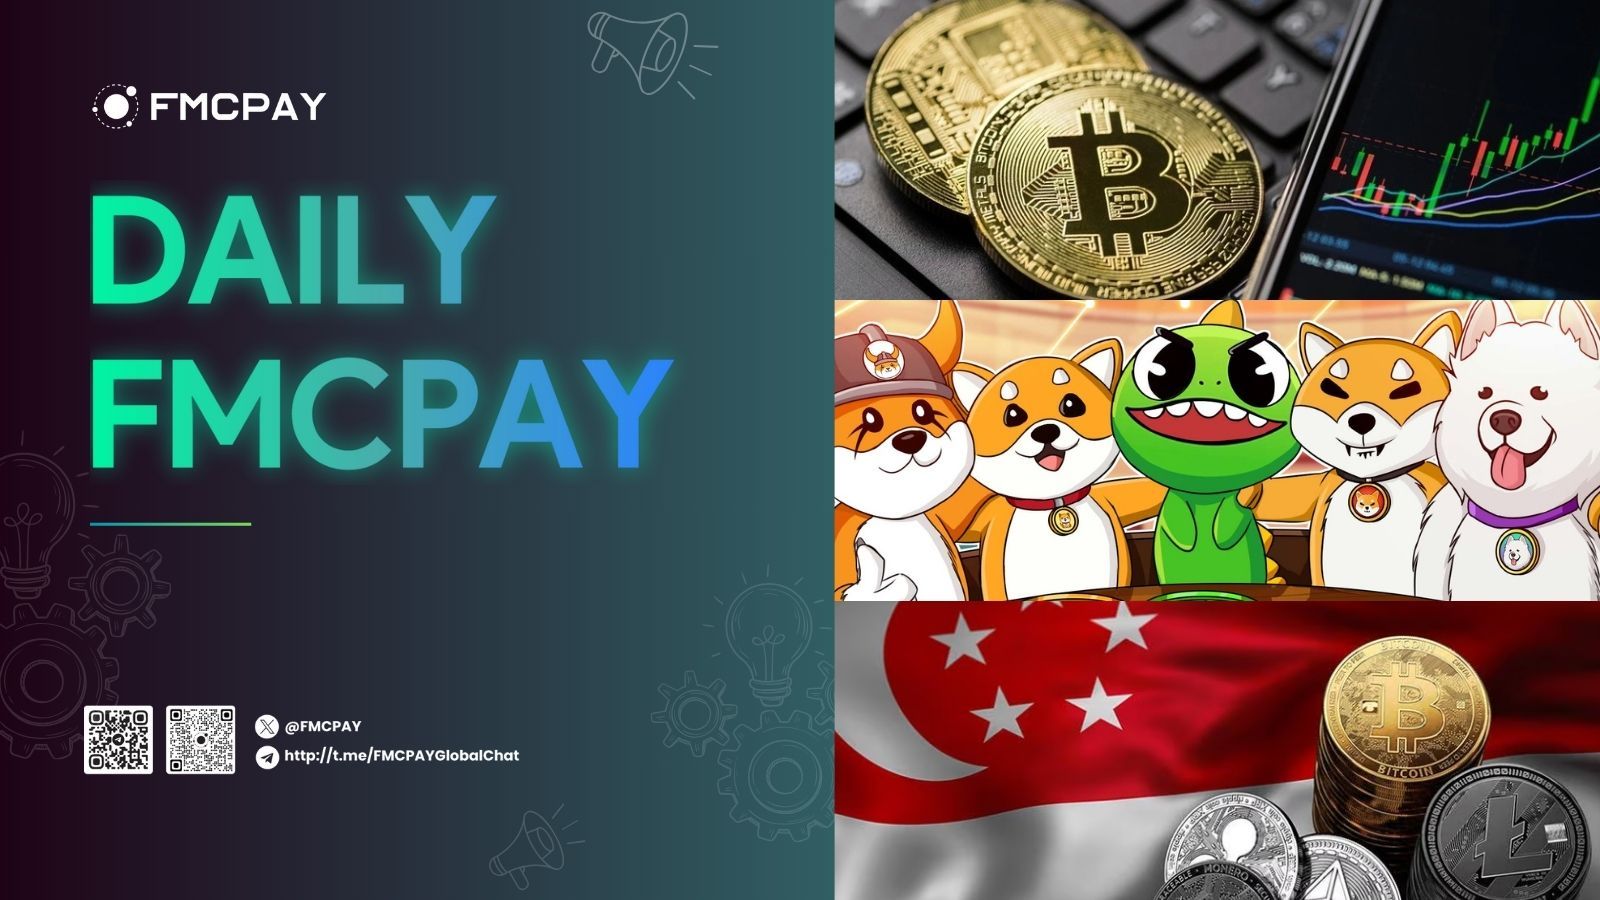 fmcpay more than 200 million usd of crypto was liquidated